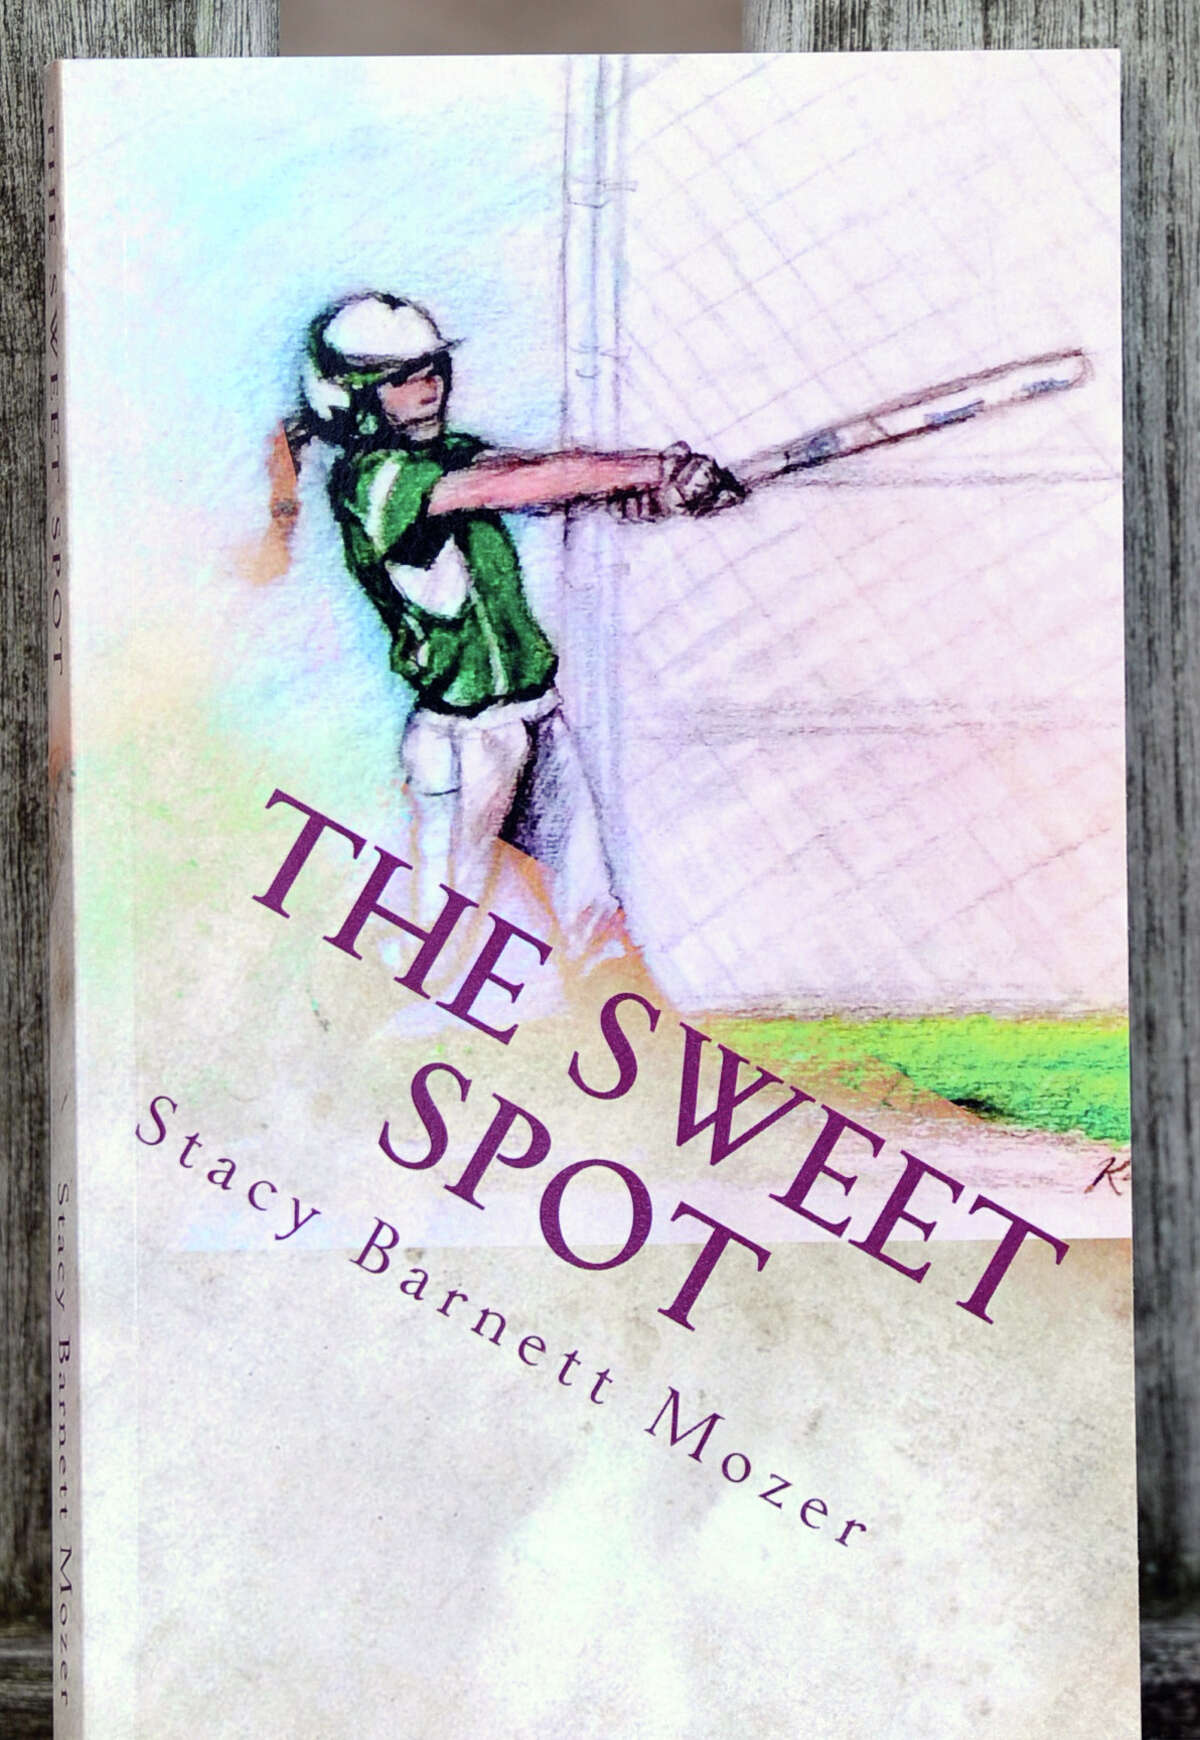 Stacy Barnett Mozer's book "The Sweet Spot," about a 13-year-old girl baseball player participating as the only girl in a 13U league, at the Riverside School in the Riverside section of Greenwich, Conn., Tuesday, Aug. 4, 2015. The cover artwork for the book was done by Karen Jacobson, a retired Riverside School art teacher.